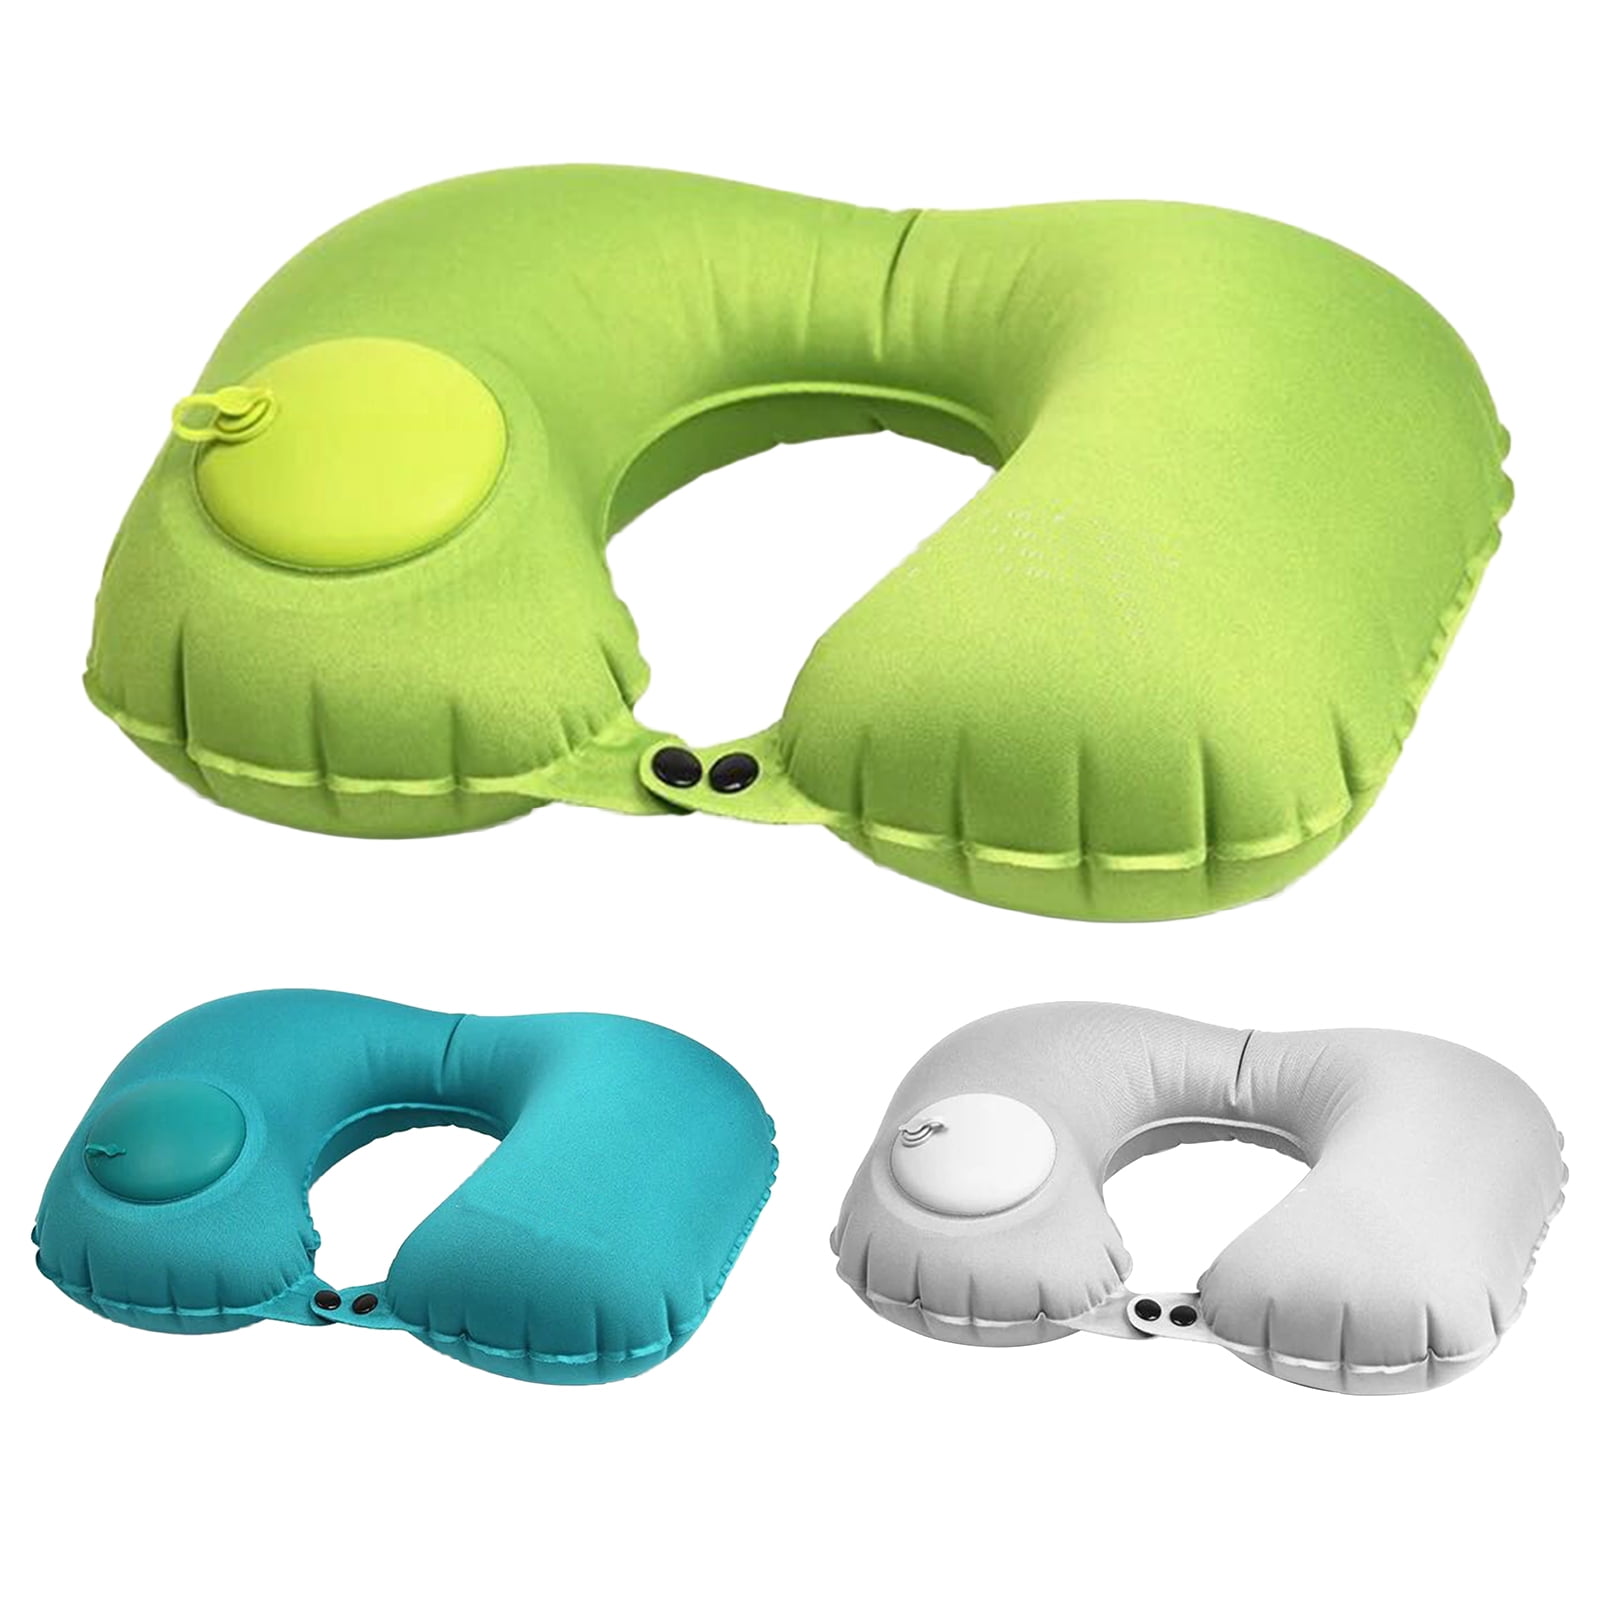 Air Cushion Self-Inflating Button Travel Neck Pillow Inflatable Airplane Pillow Home & Garden Home Textiles 